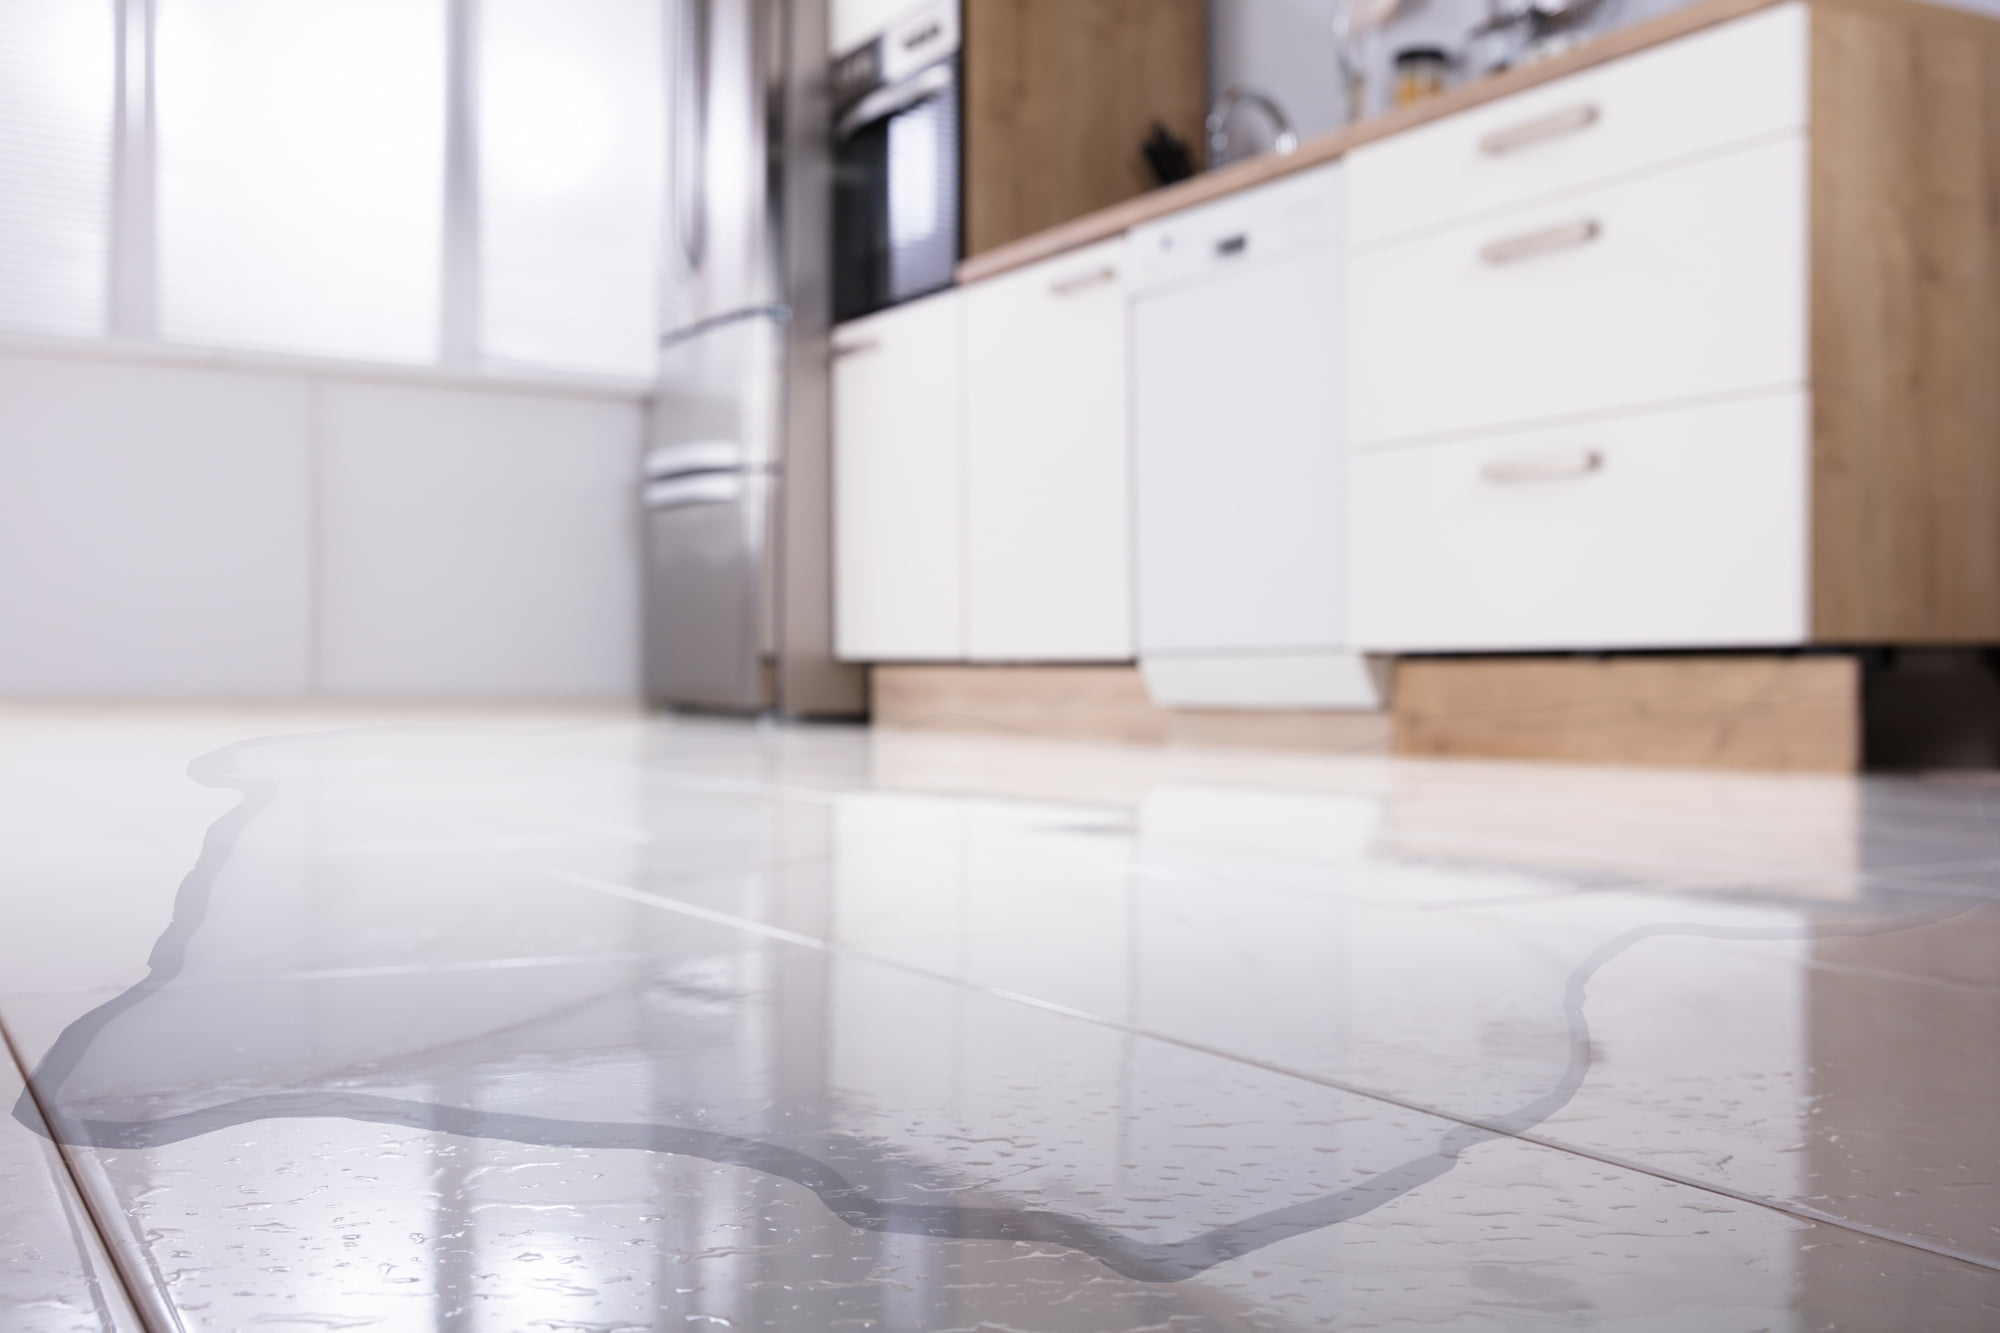 When you need an effective solution for managing water damage in your home, find out how to hire the best water restoration company.